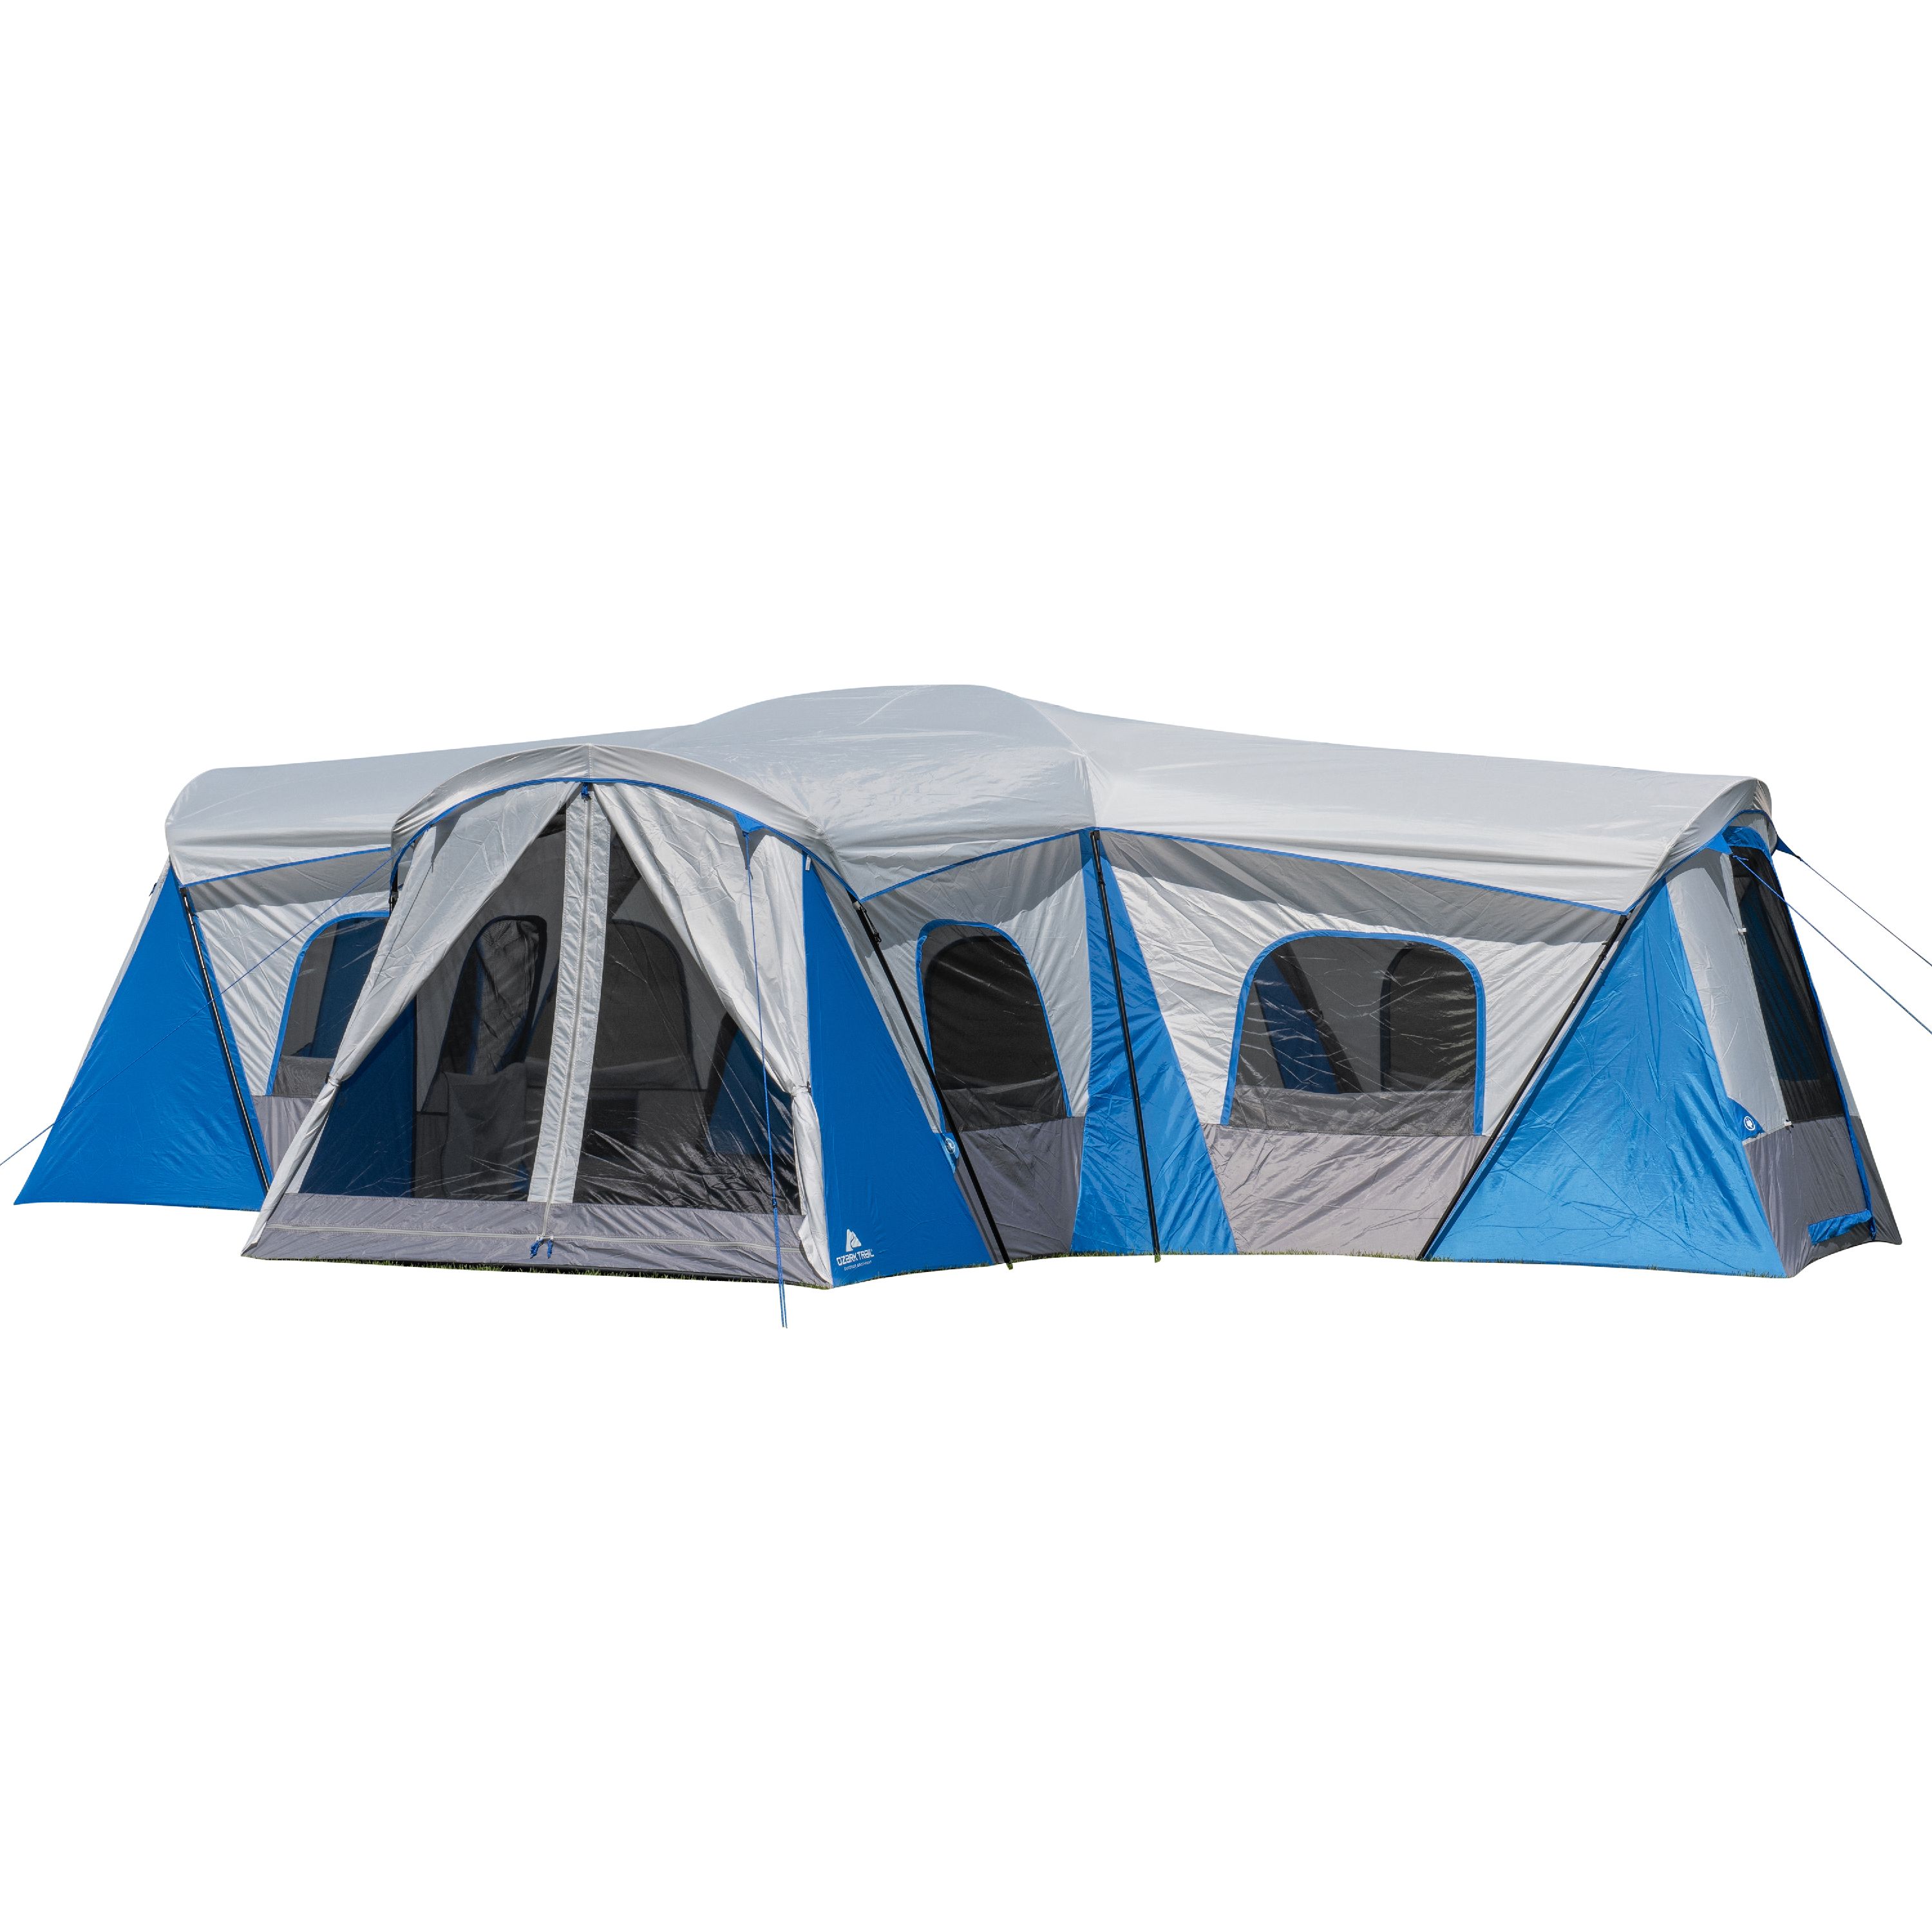 Ozark Trail 16-Person 3-Room Family Cabin Tent, with 3 Entrances - image 1 of 16